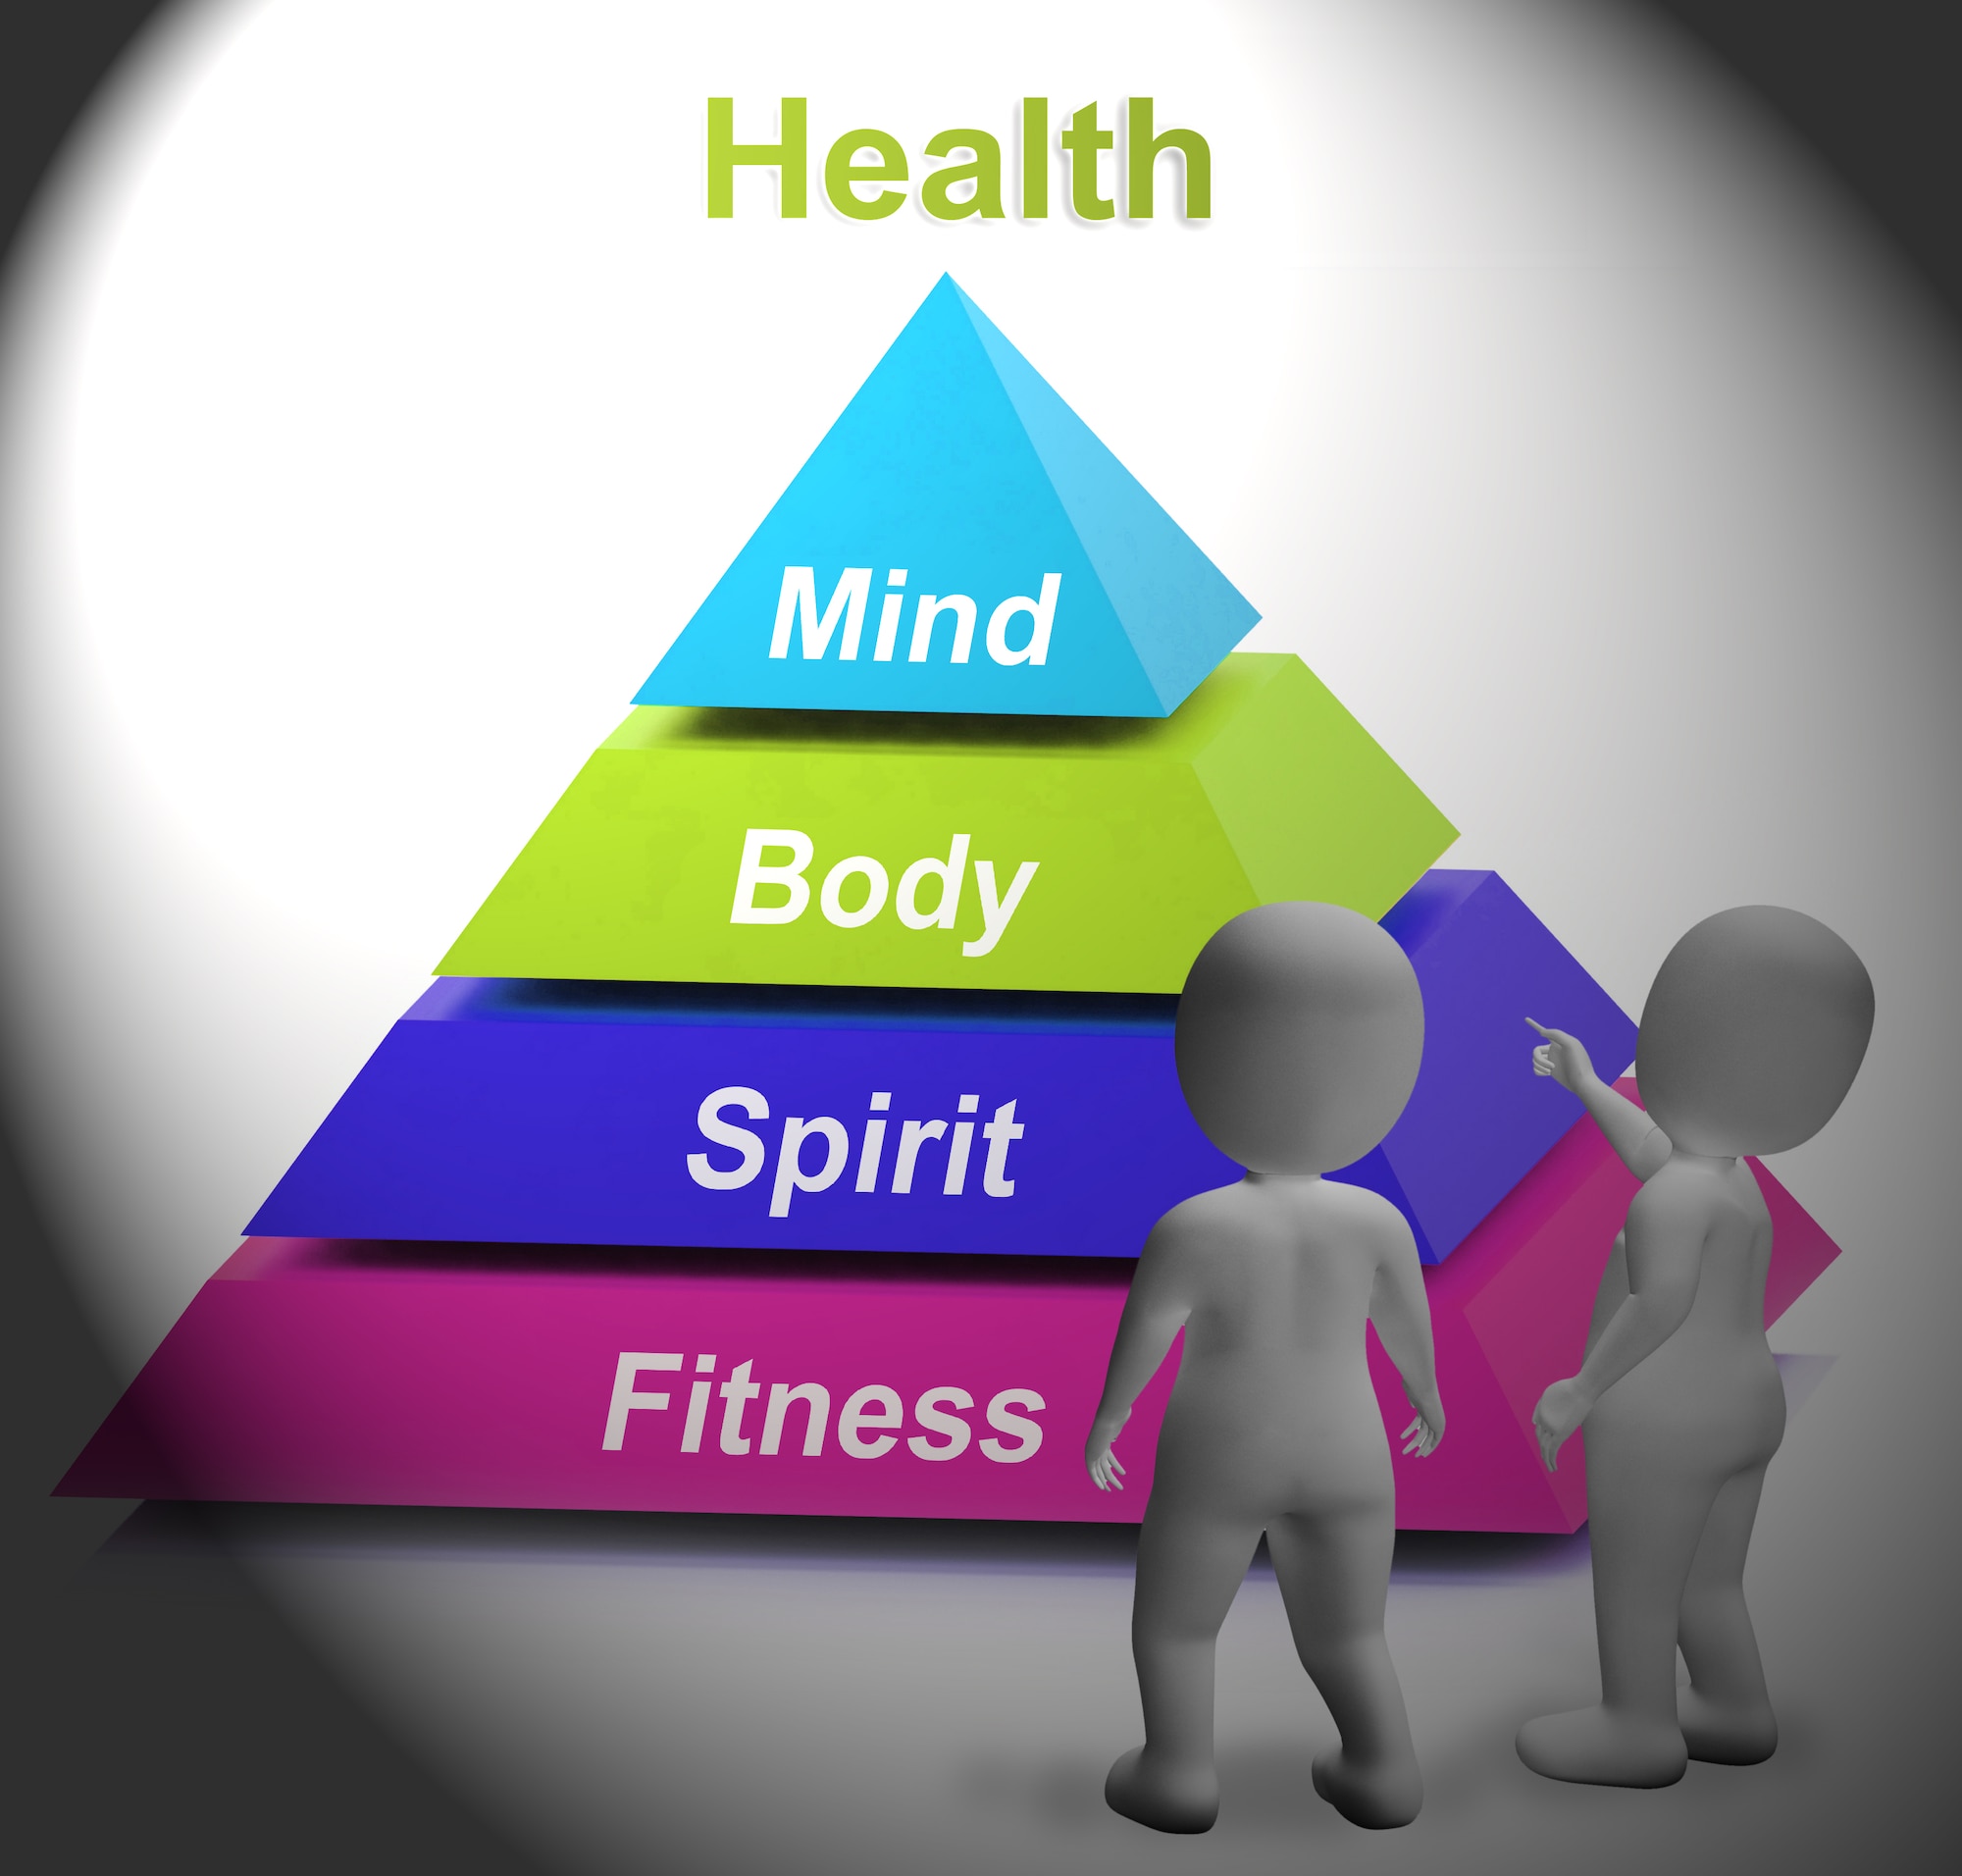 Photo shows a pyramid with the words fitness, spirit, body and mind in order from bottom to top.